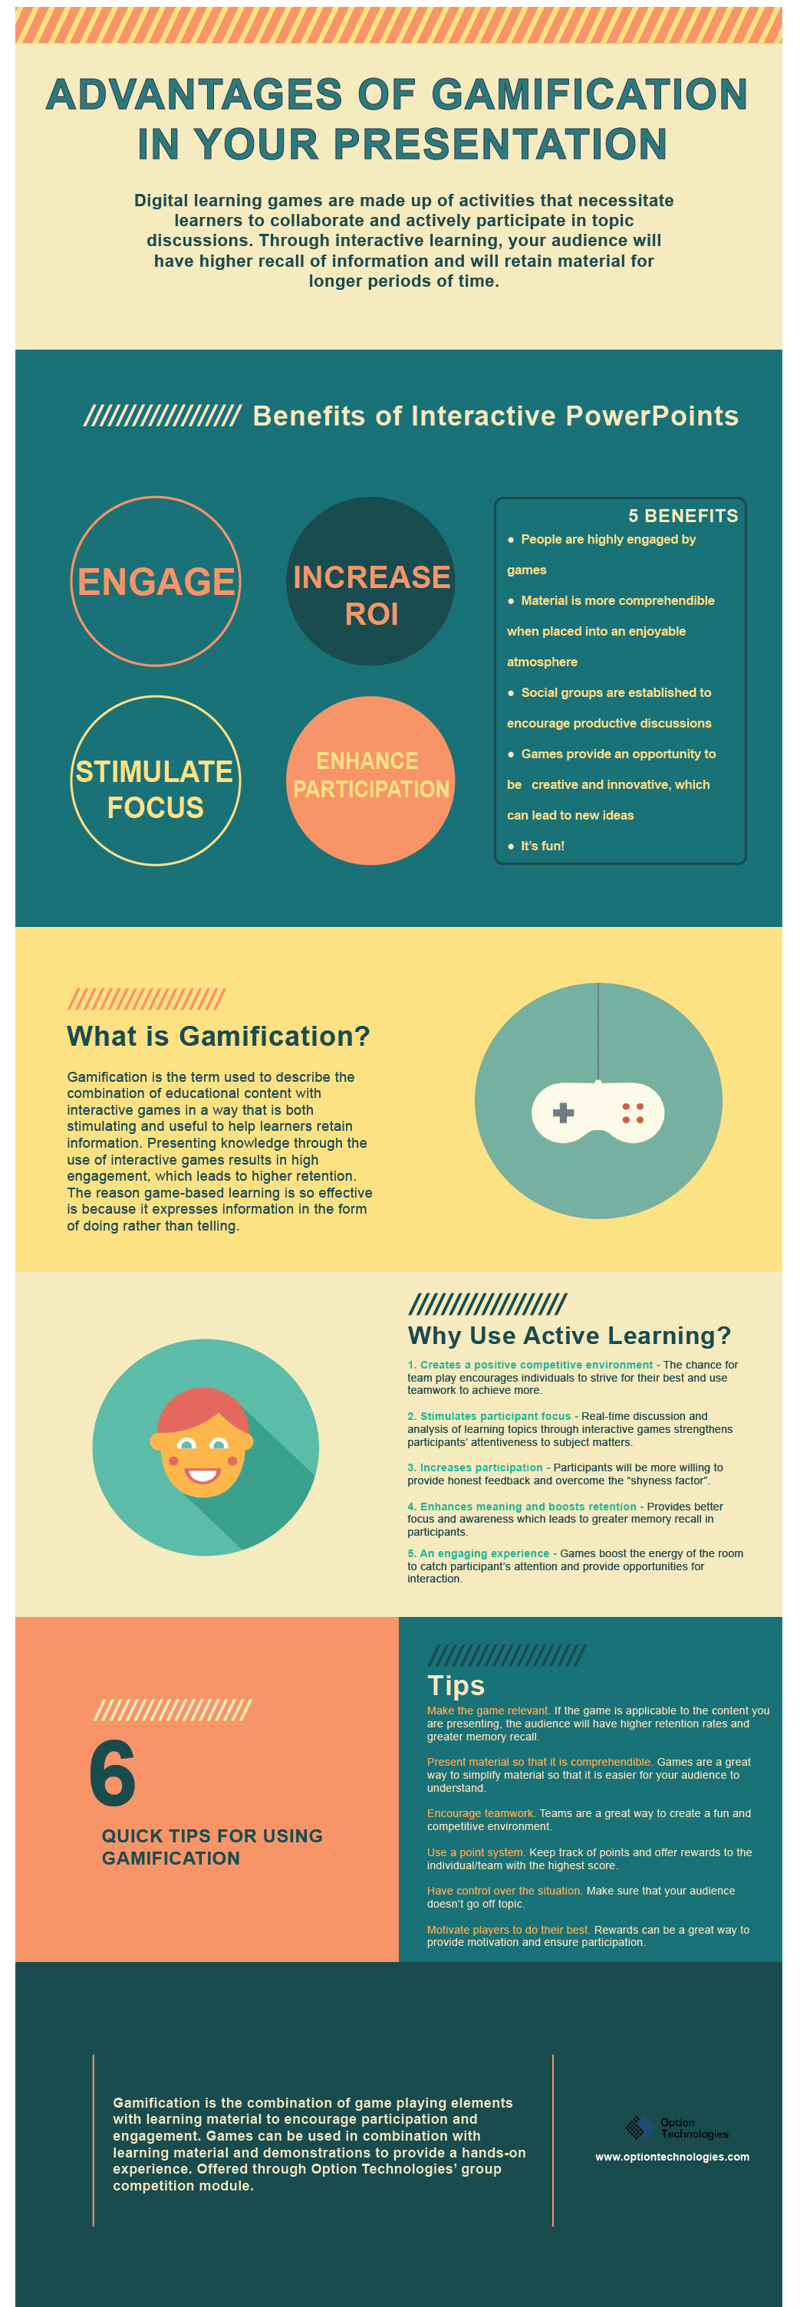 Advantages of Gamification in Your Presentation (Infographic)